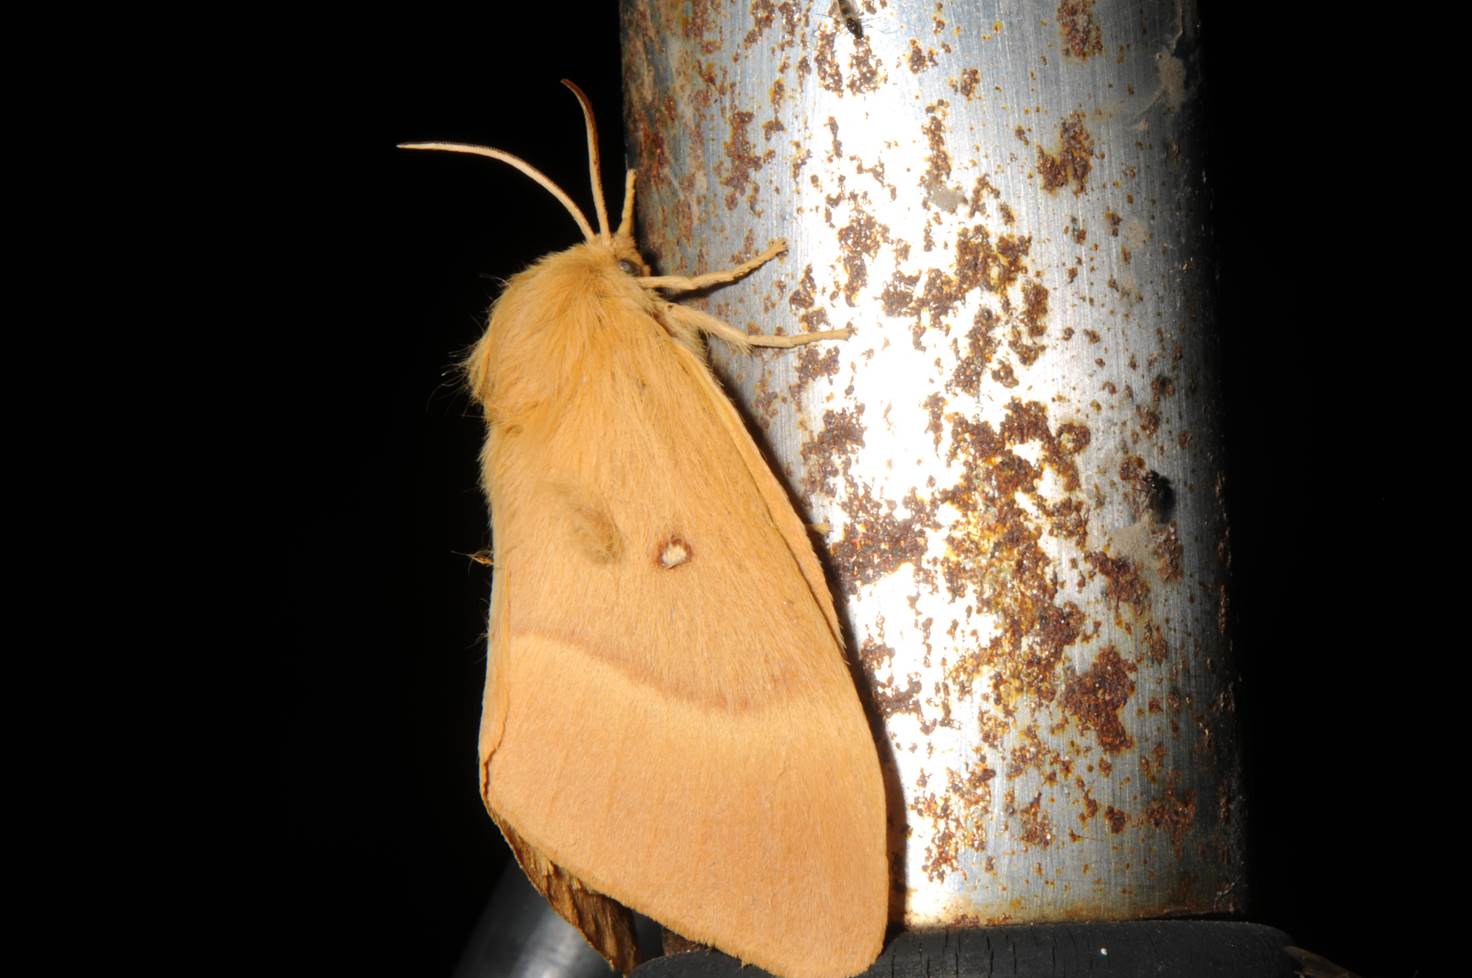 A moth on a metal pole

Description automatically generated